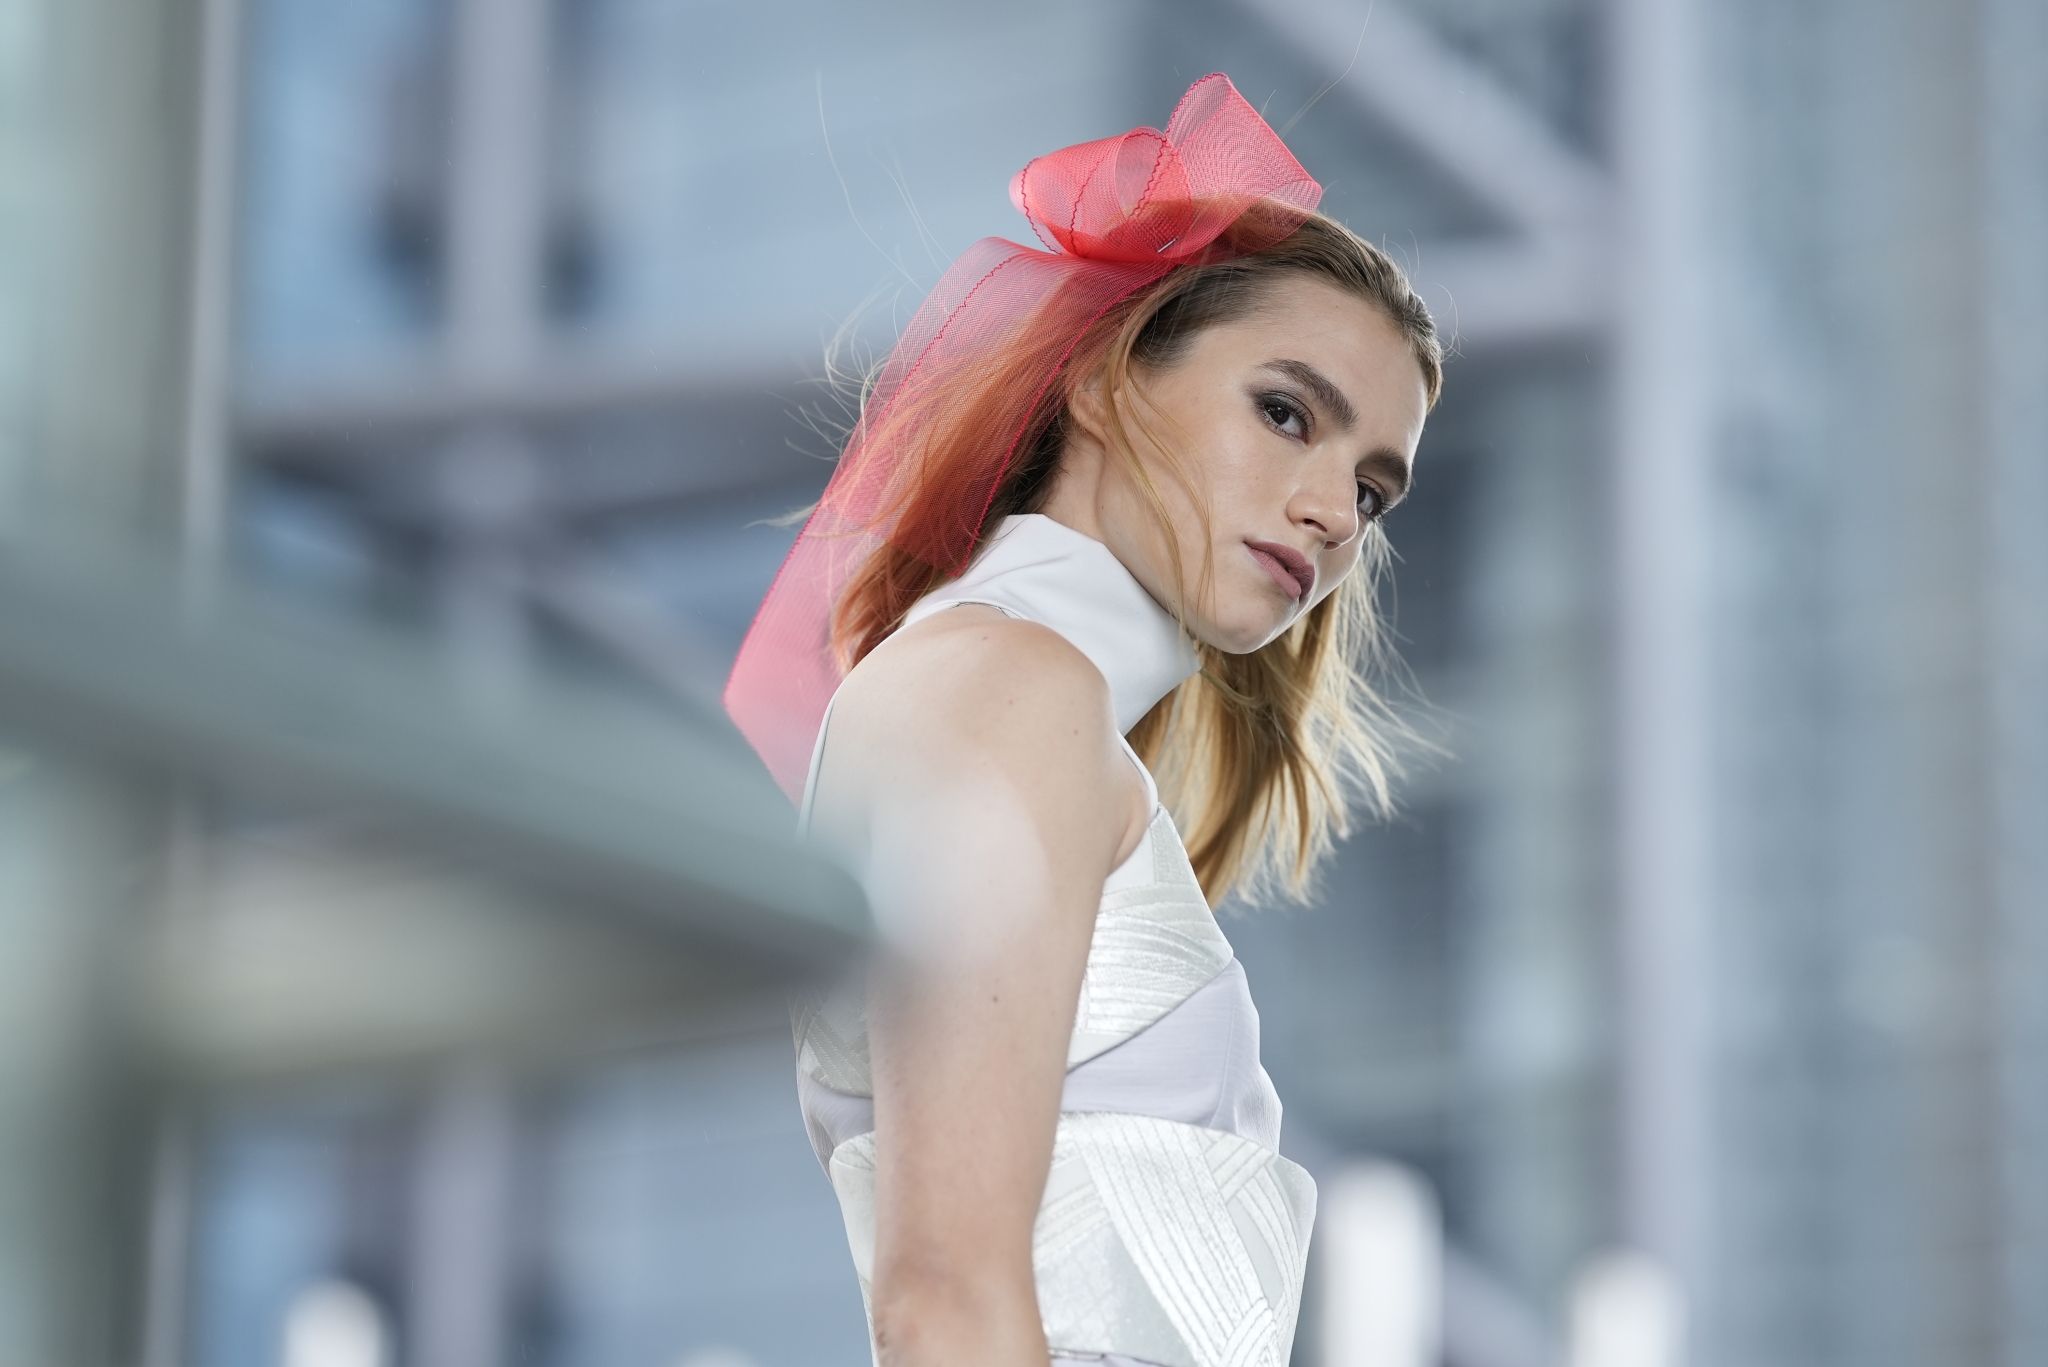 Female model with ribbon in her hair with deep bokeh foreground and background